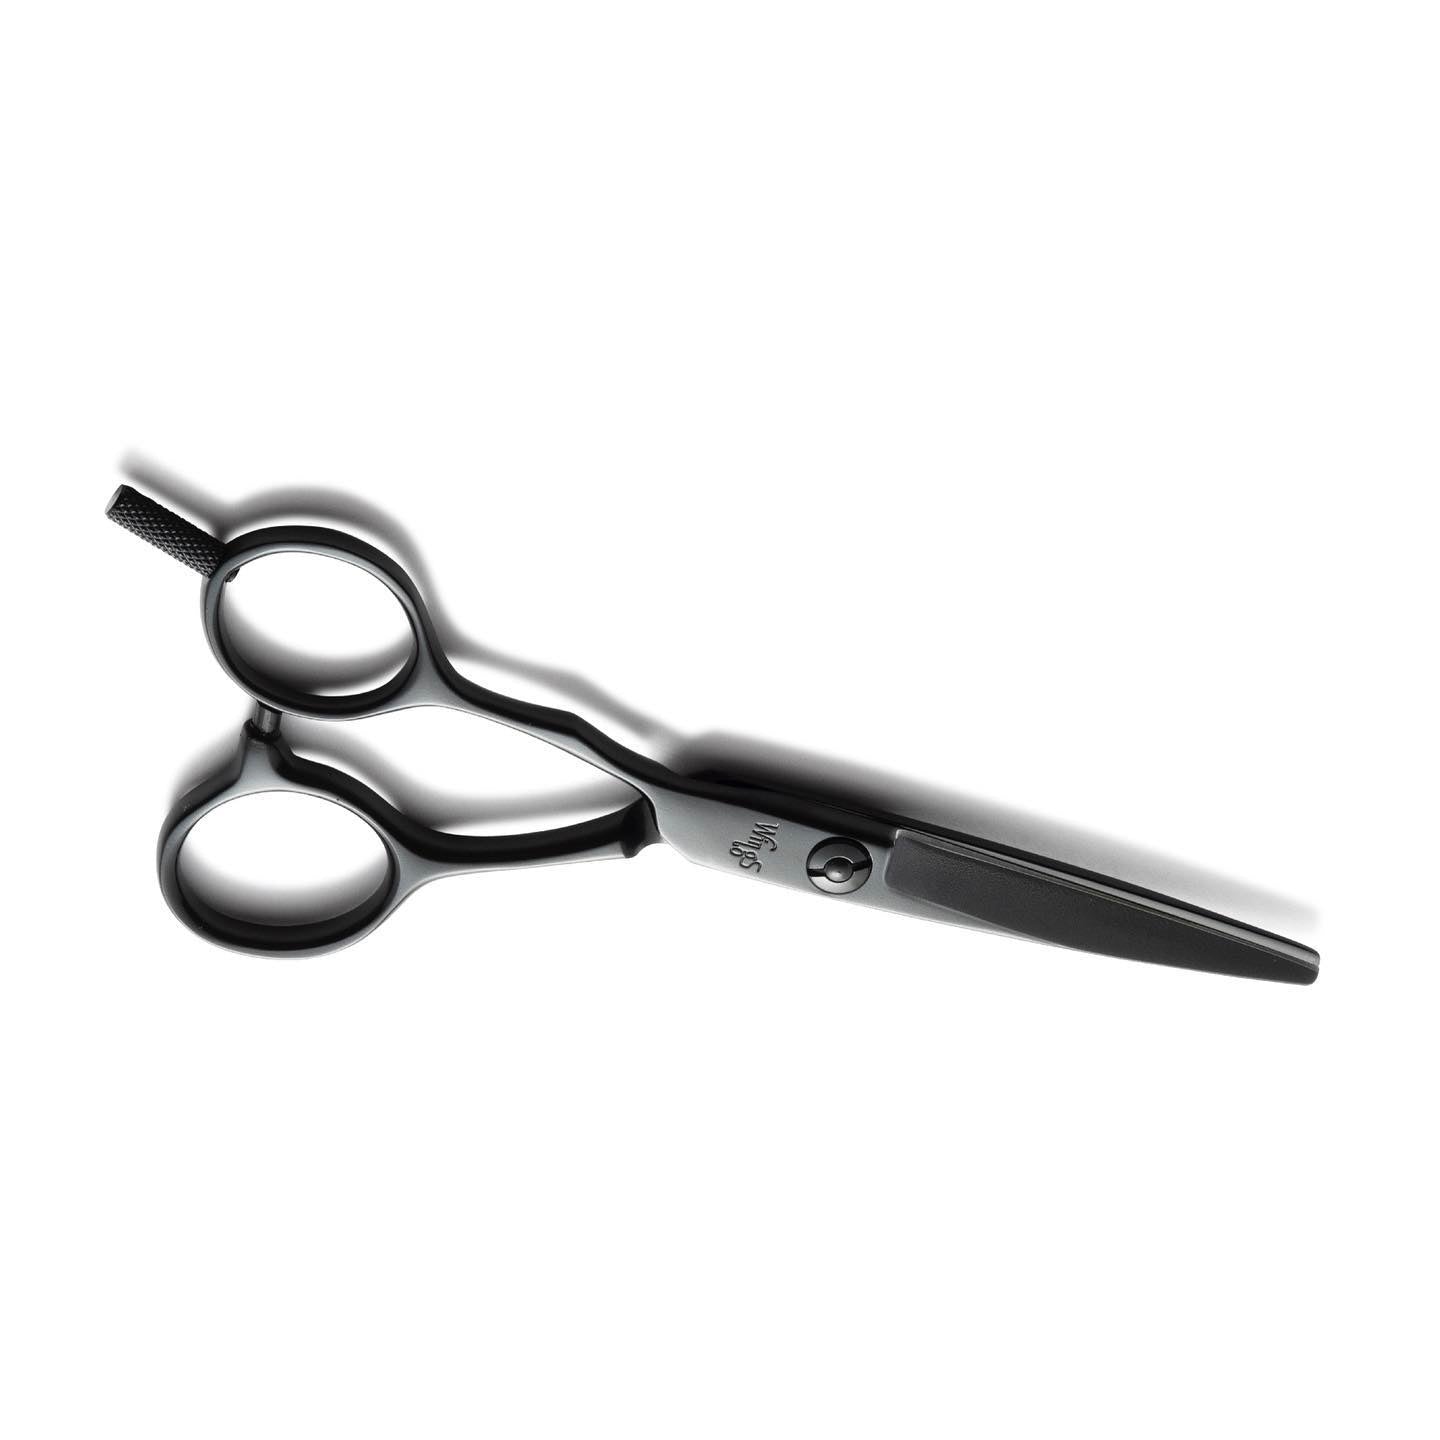  HB Professionals Hair Cutting And Hair Dressing Shears